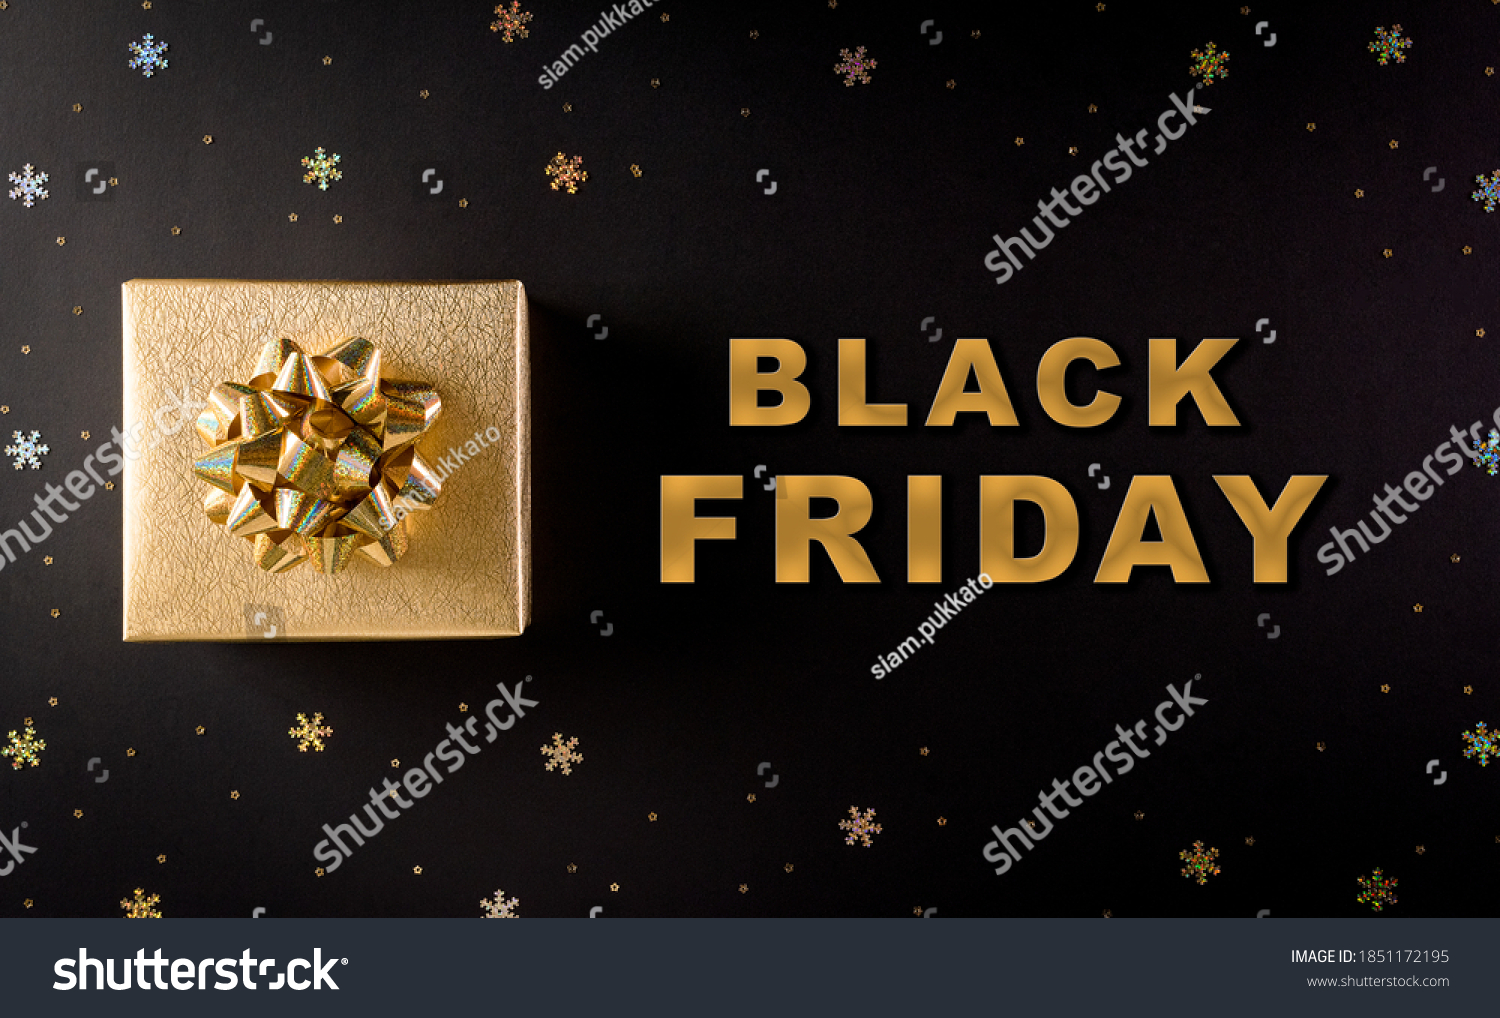 Top view of golden christmas gift boxes on black background with Black Friday text. Black Friday Sale, Banner, poster composition. #1851172195